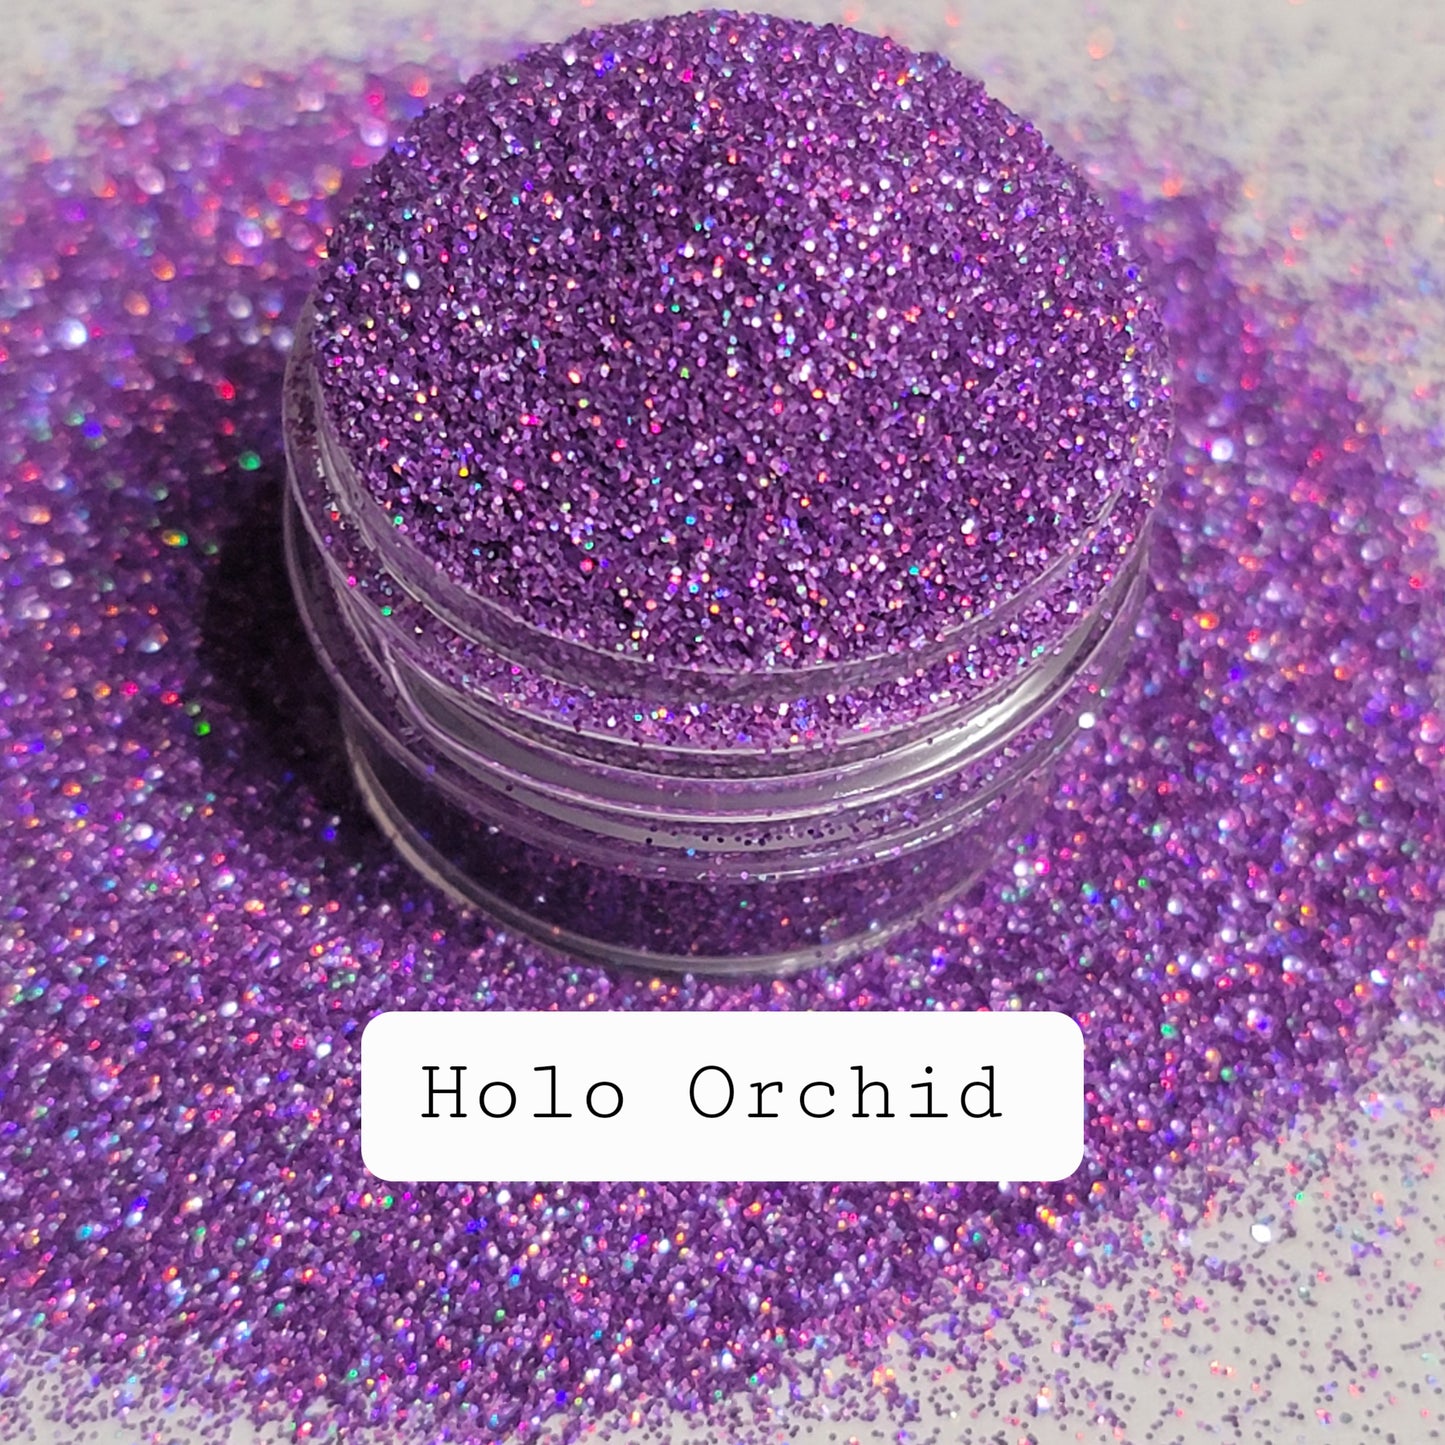 Holo Orchid